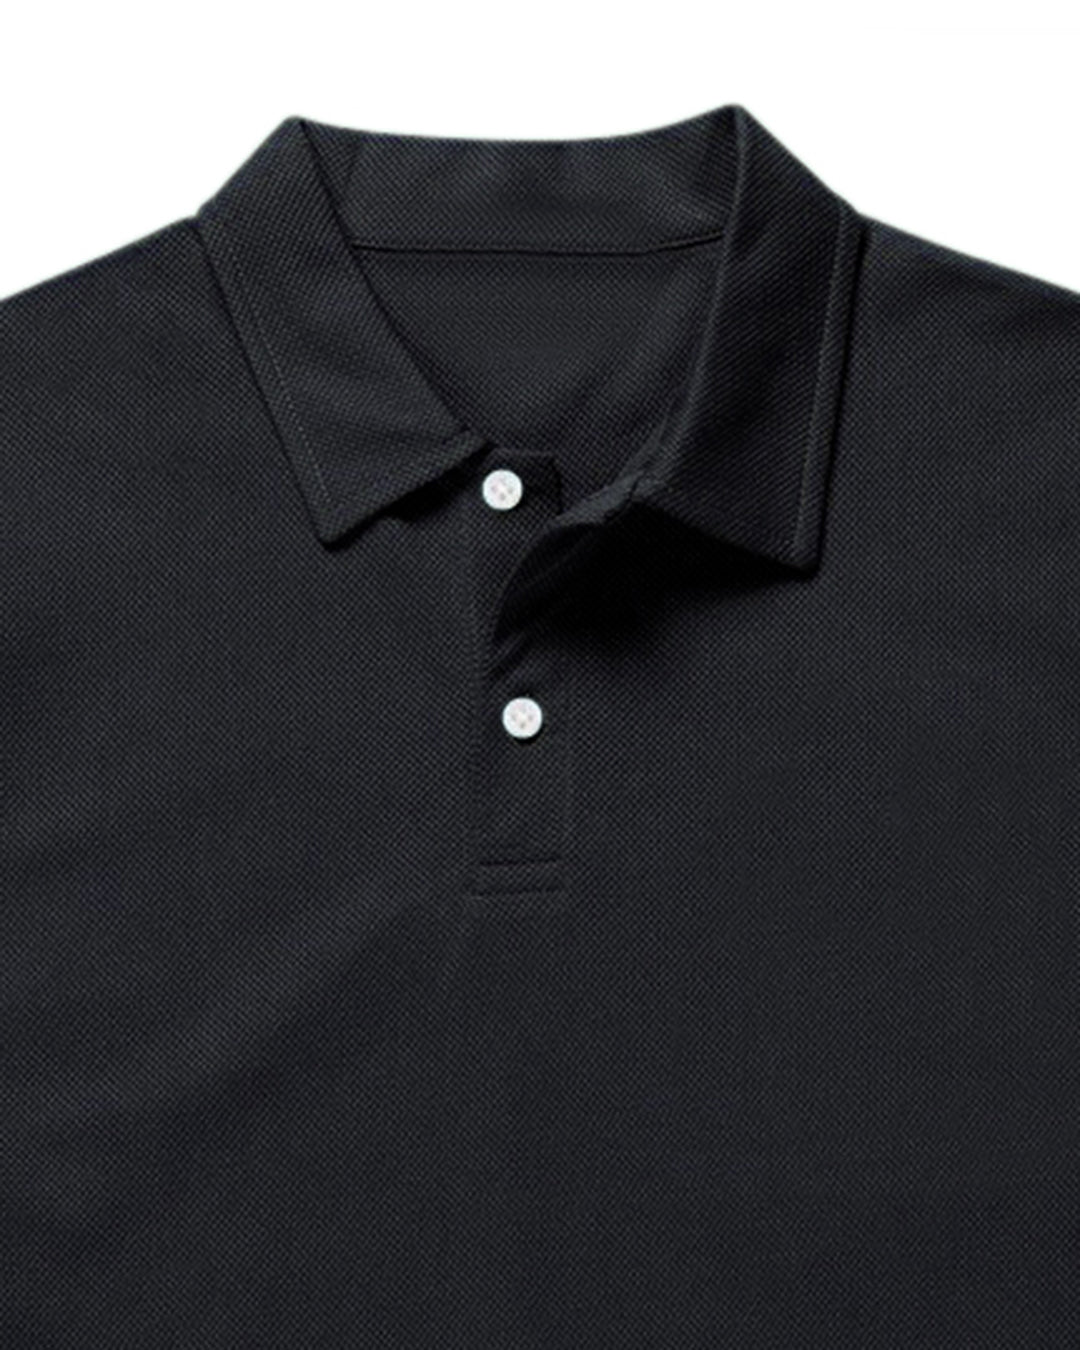 Collar of the custom oxford polo shirt for men by Luxire in midnight grey